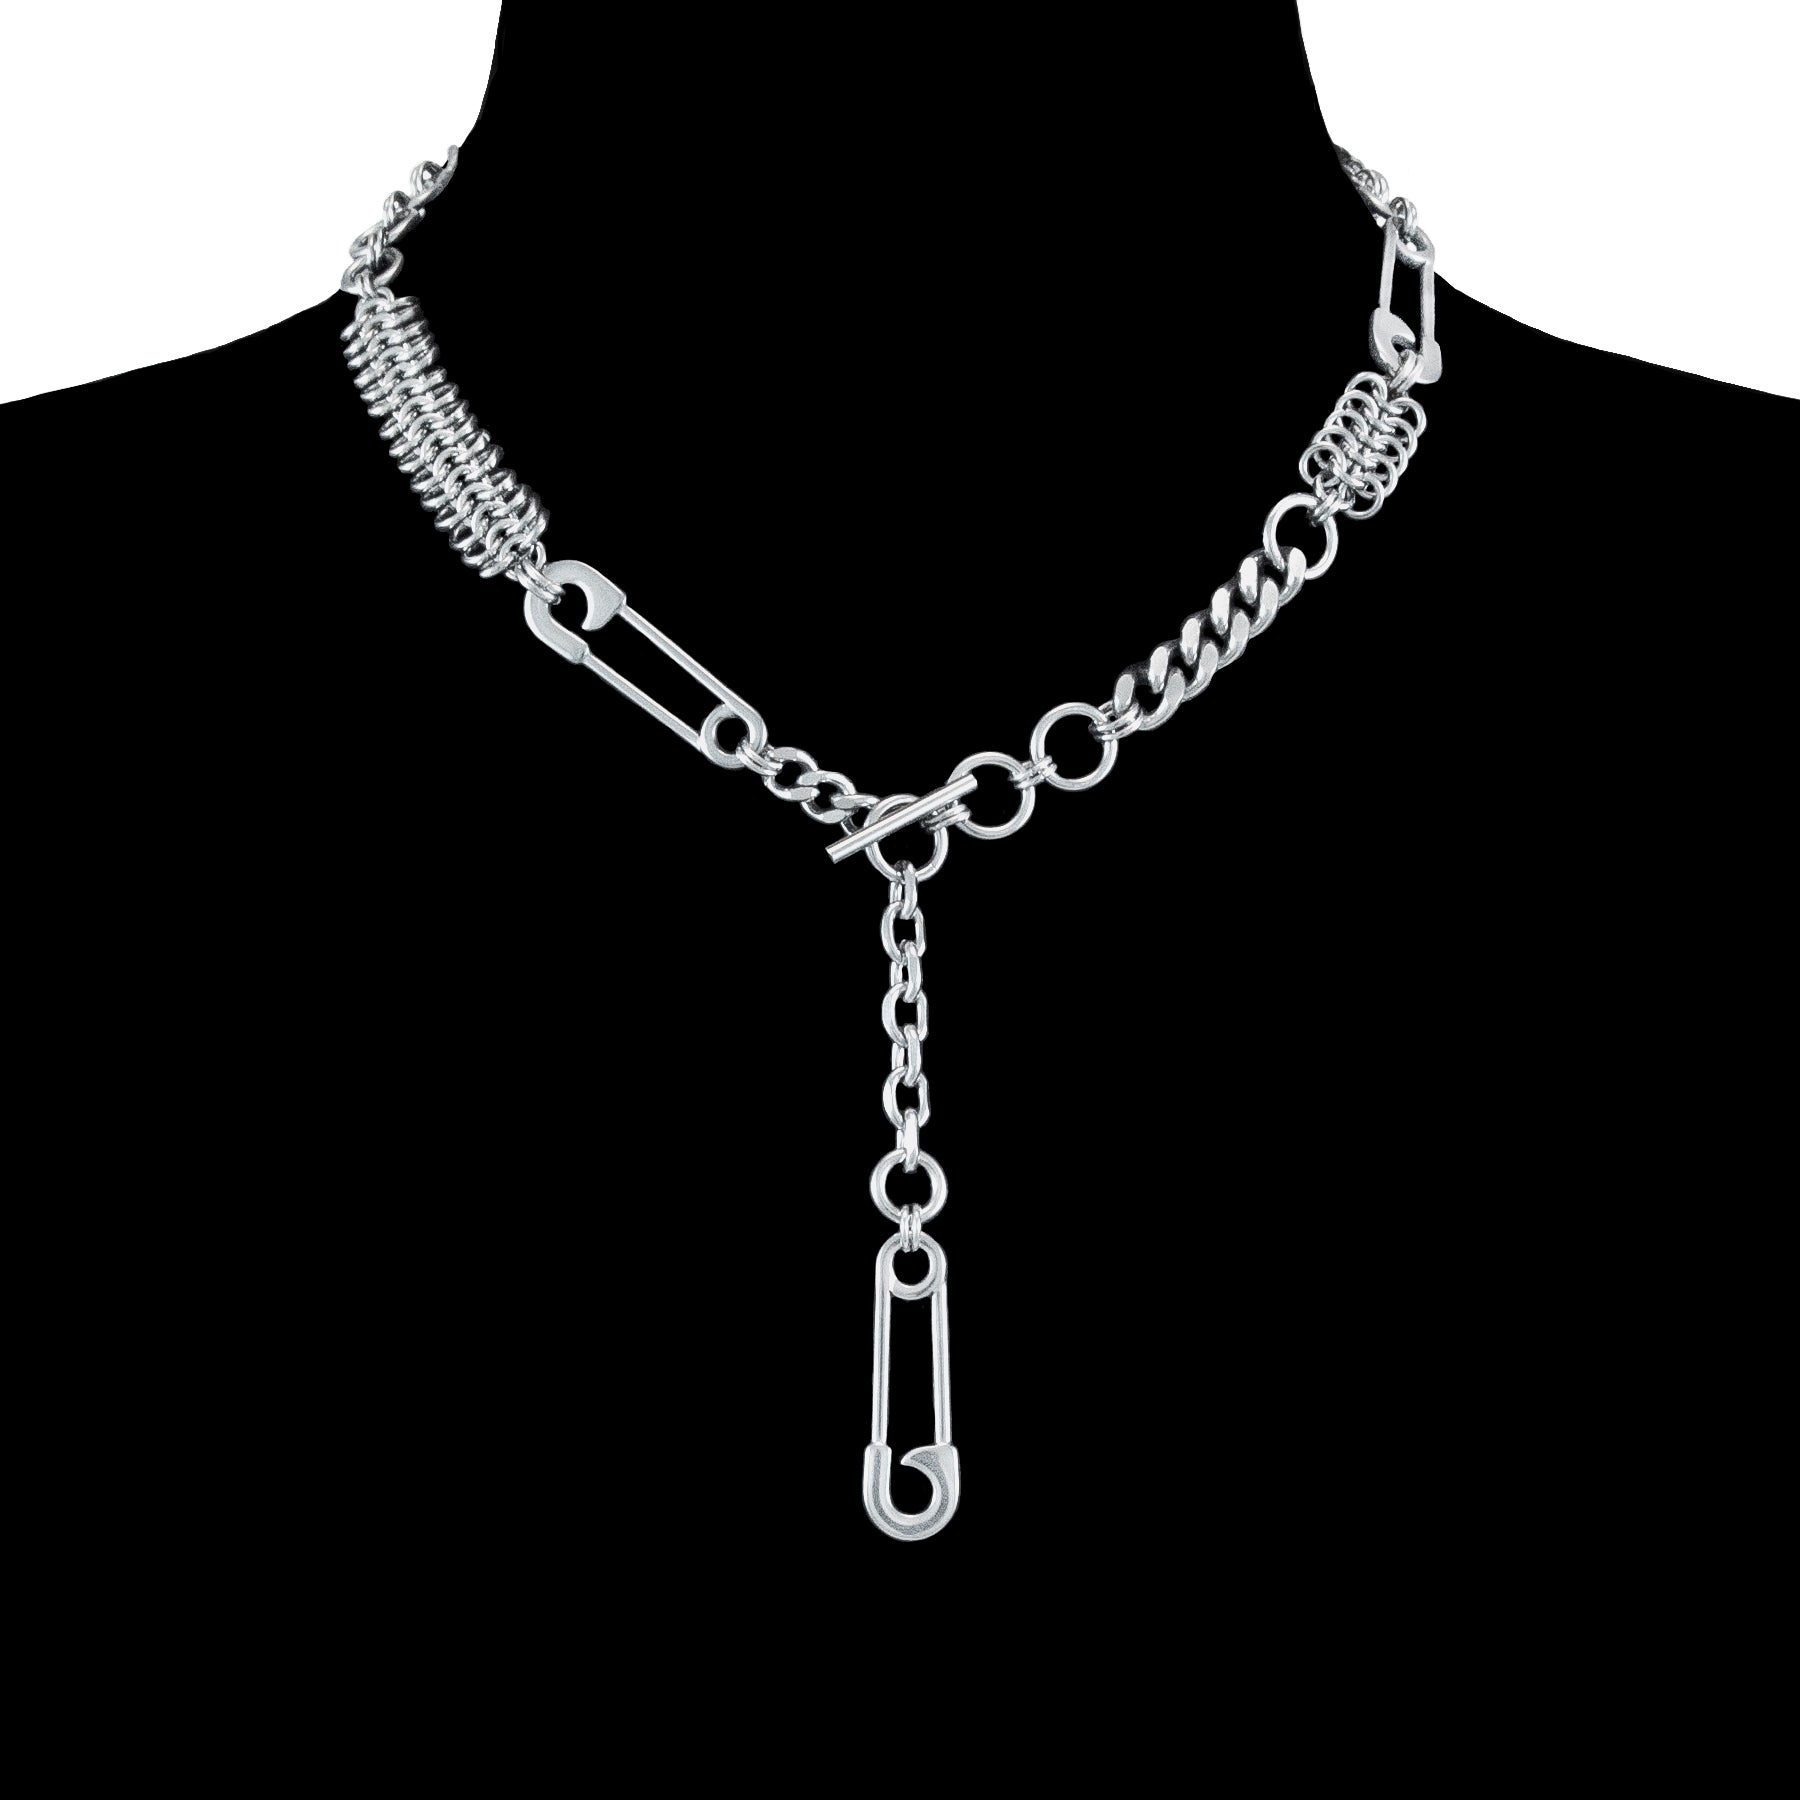 SAFETY PIN front clasp necklace in sterling silver -- wear by